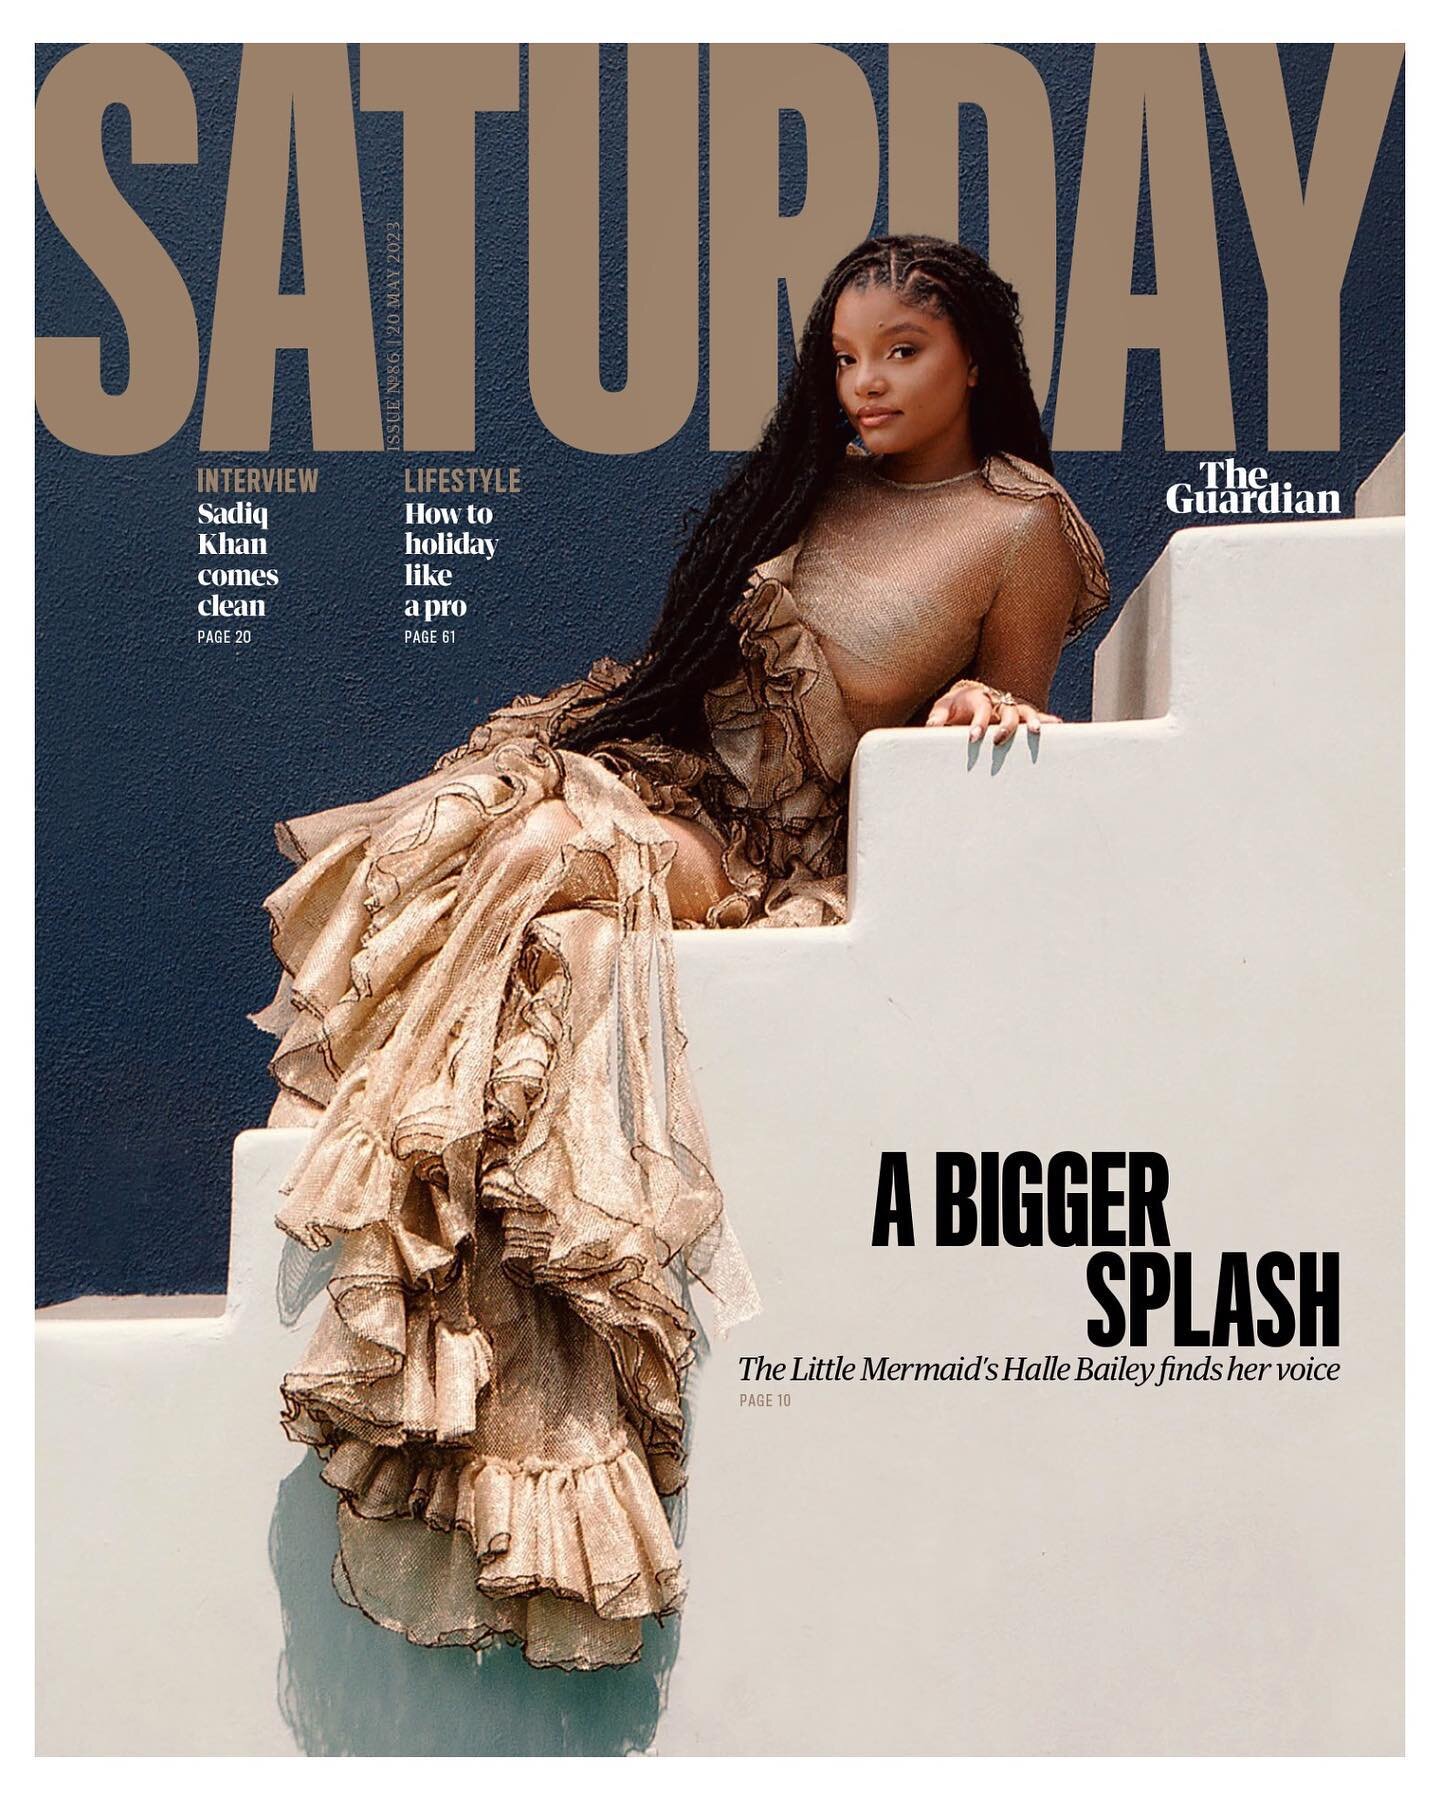 A pleasure to photograph the sweetest @hallebailey for @gdnsaturday. A big thank you to all involved. 

Styling: @annaannasusu
Hair: @sparkyourhair
Makeup: @beautybychrisc
Written by: @rlnicholson
Photo Team: Scott Turner, Carmelita Mae Wimberly
Phot